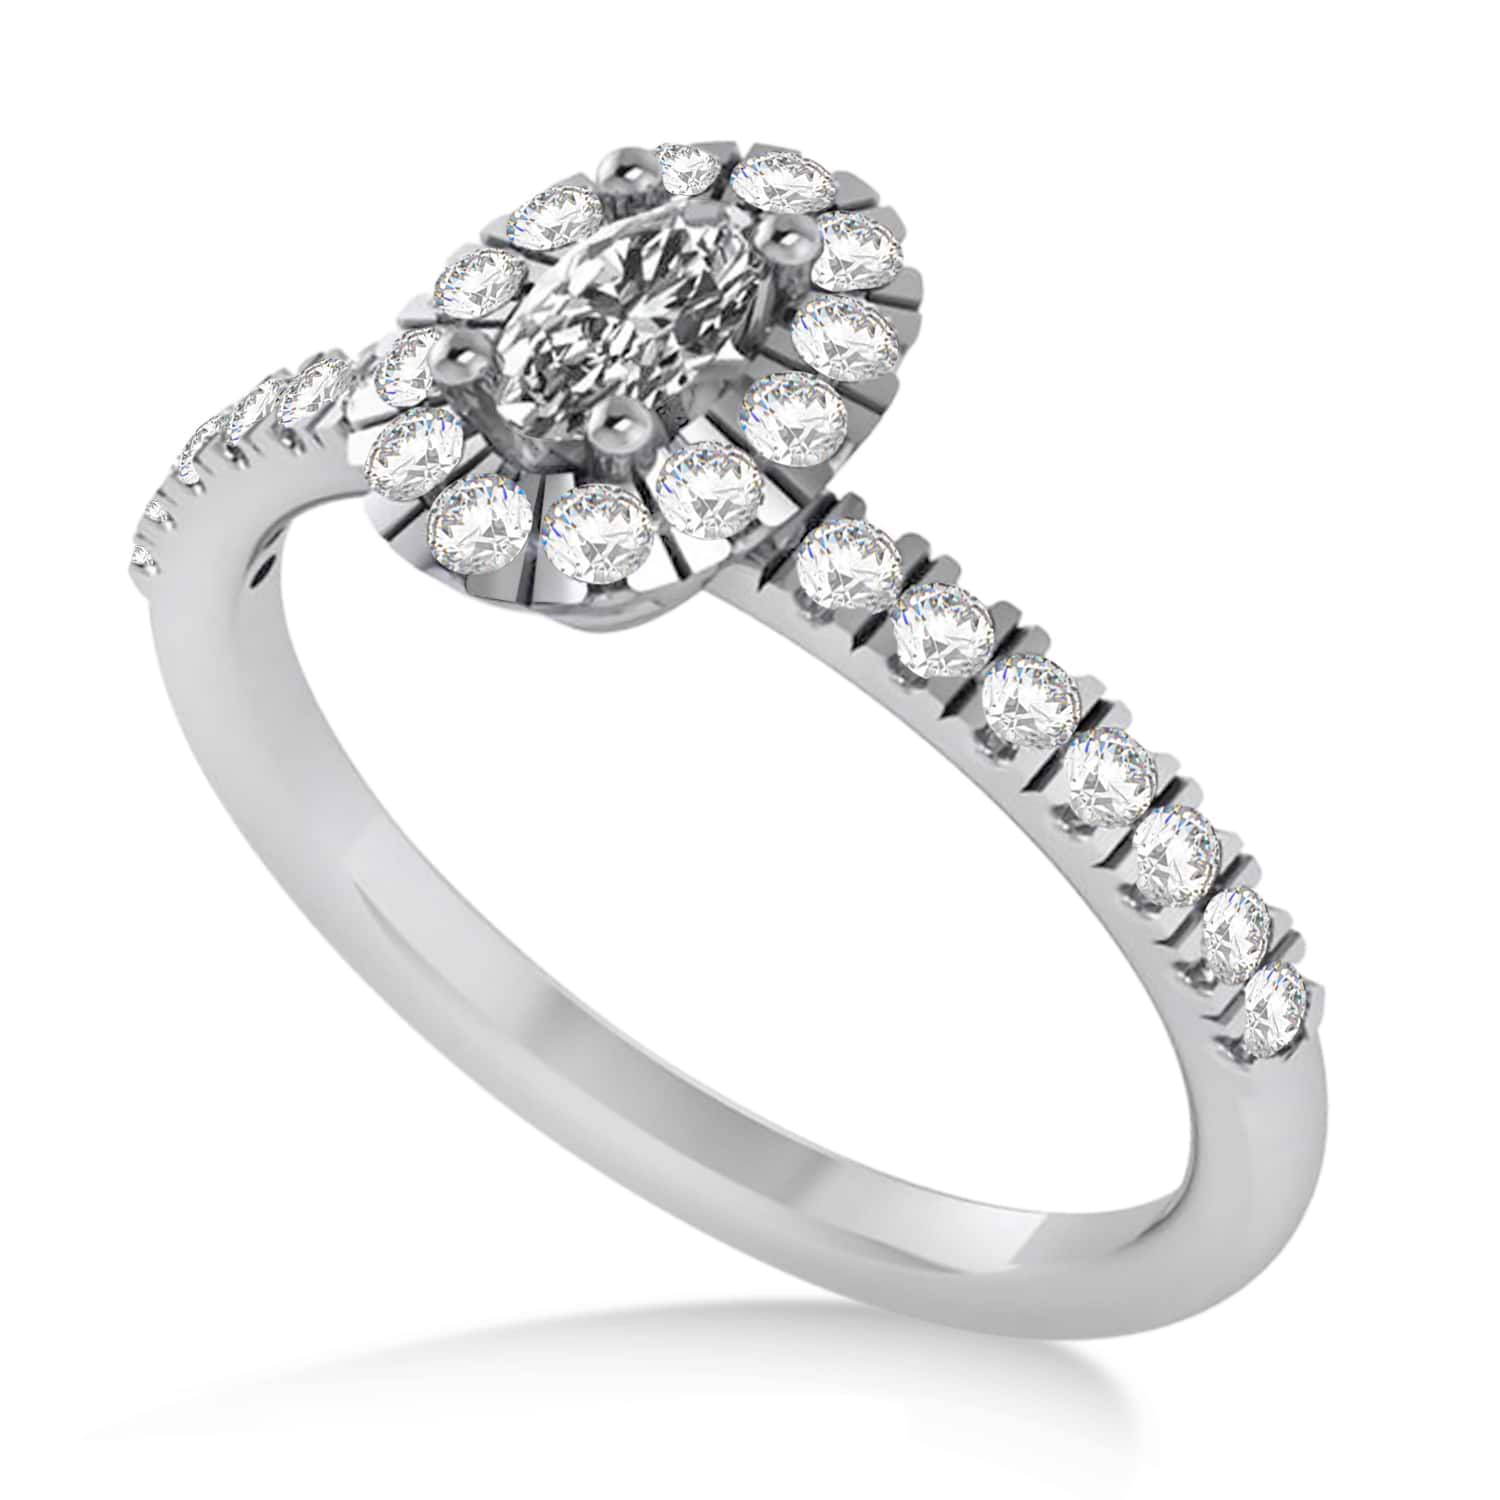 Oval Lab Grown Diamond Halo Engagement Ring 14k White Gold (0.60ct)